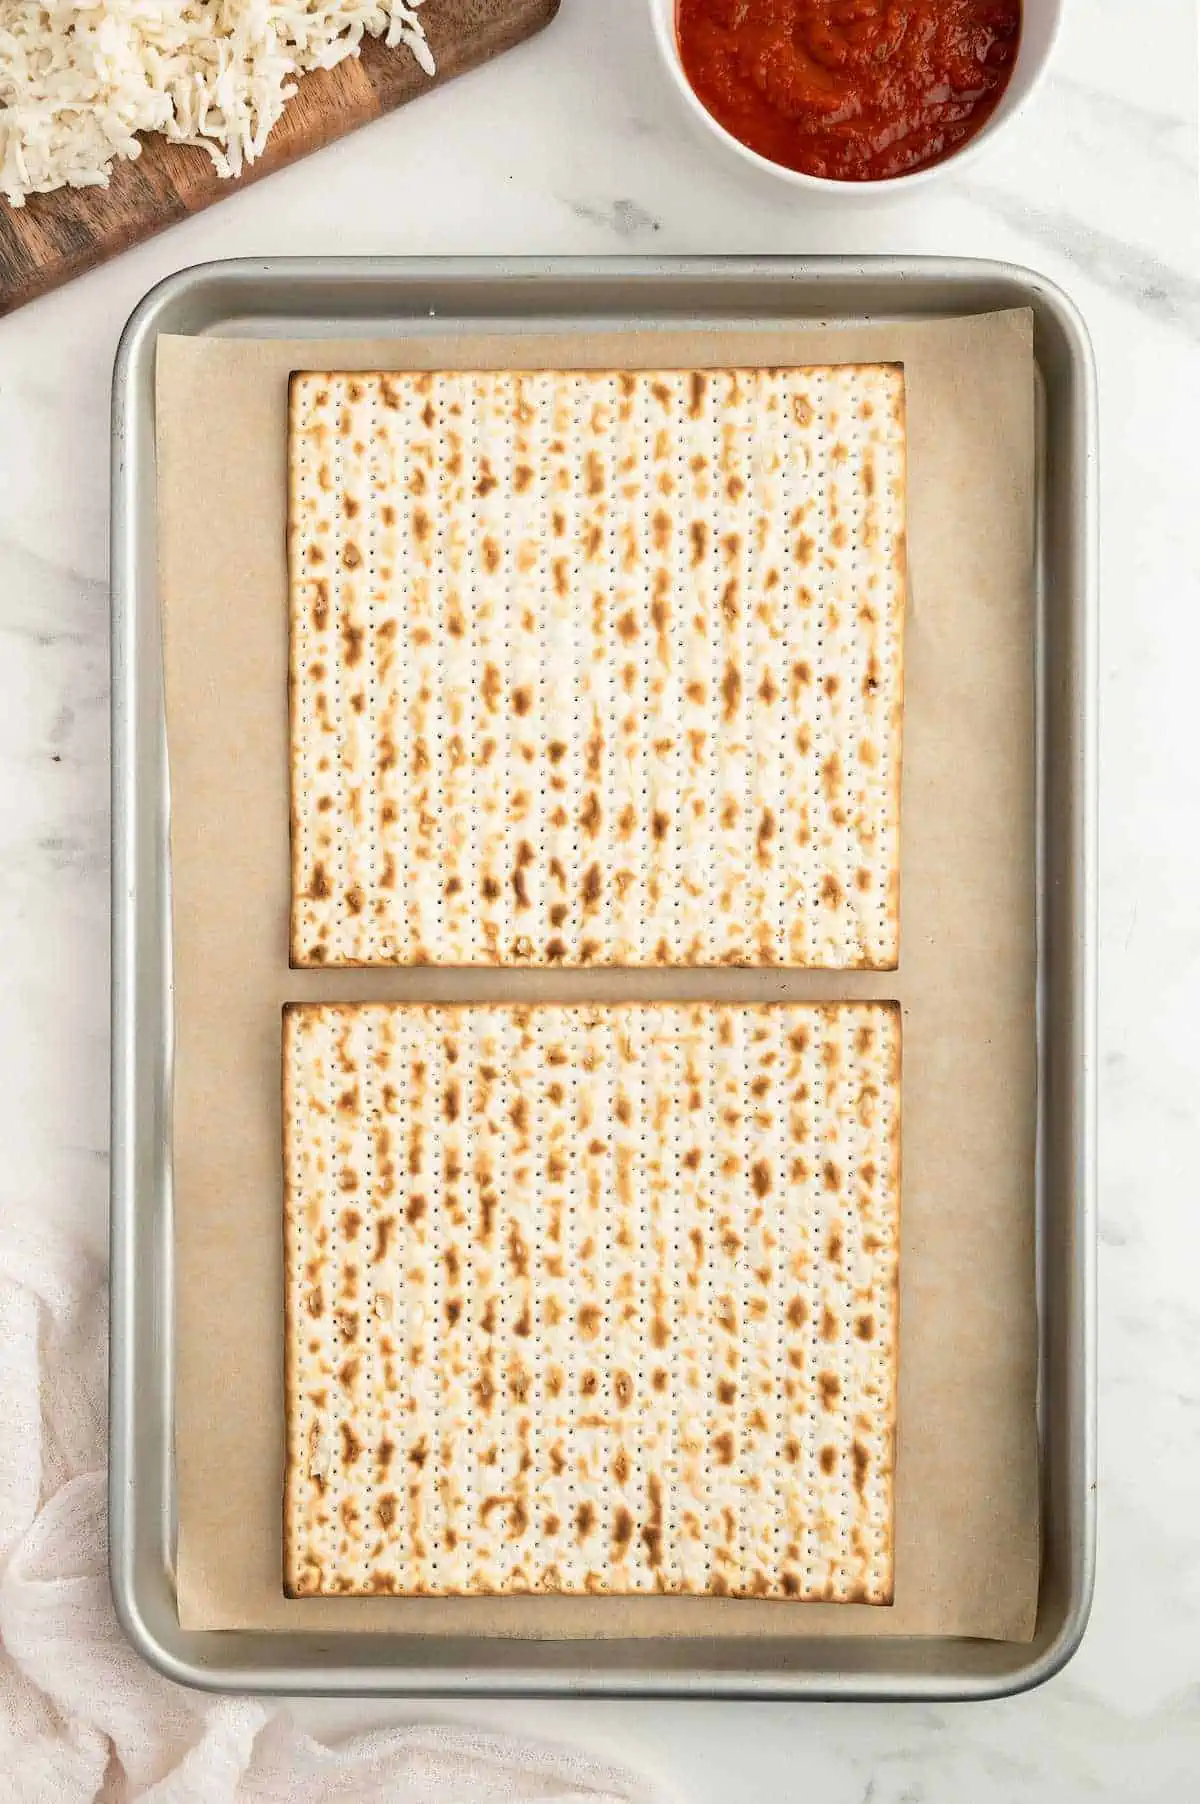 Two matzah crackers on a baking tray.